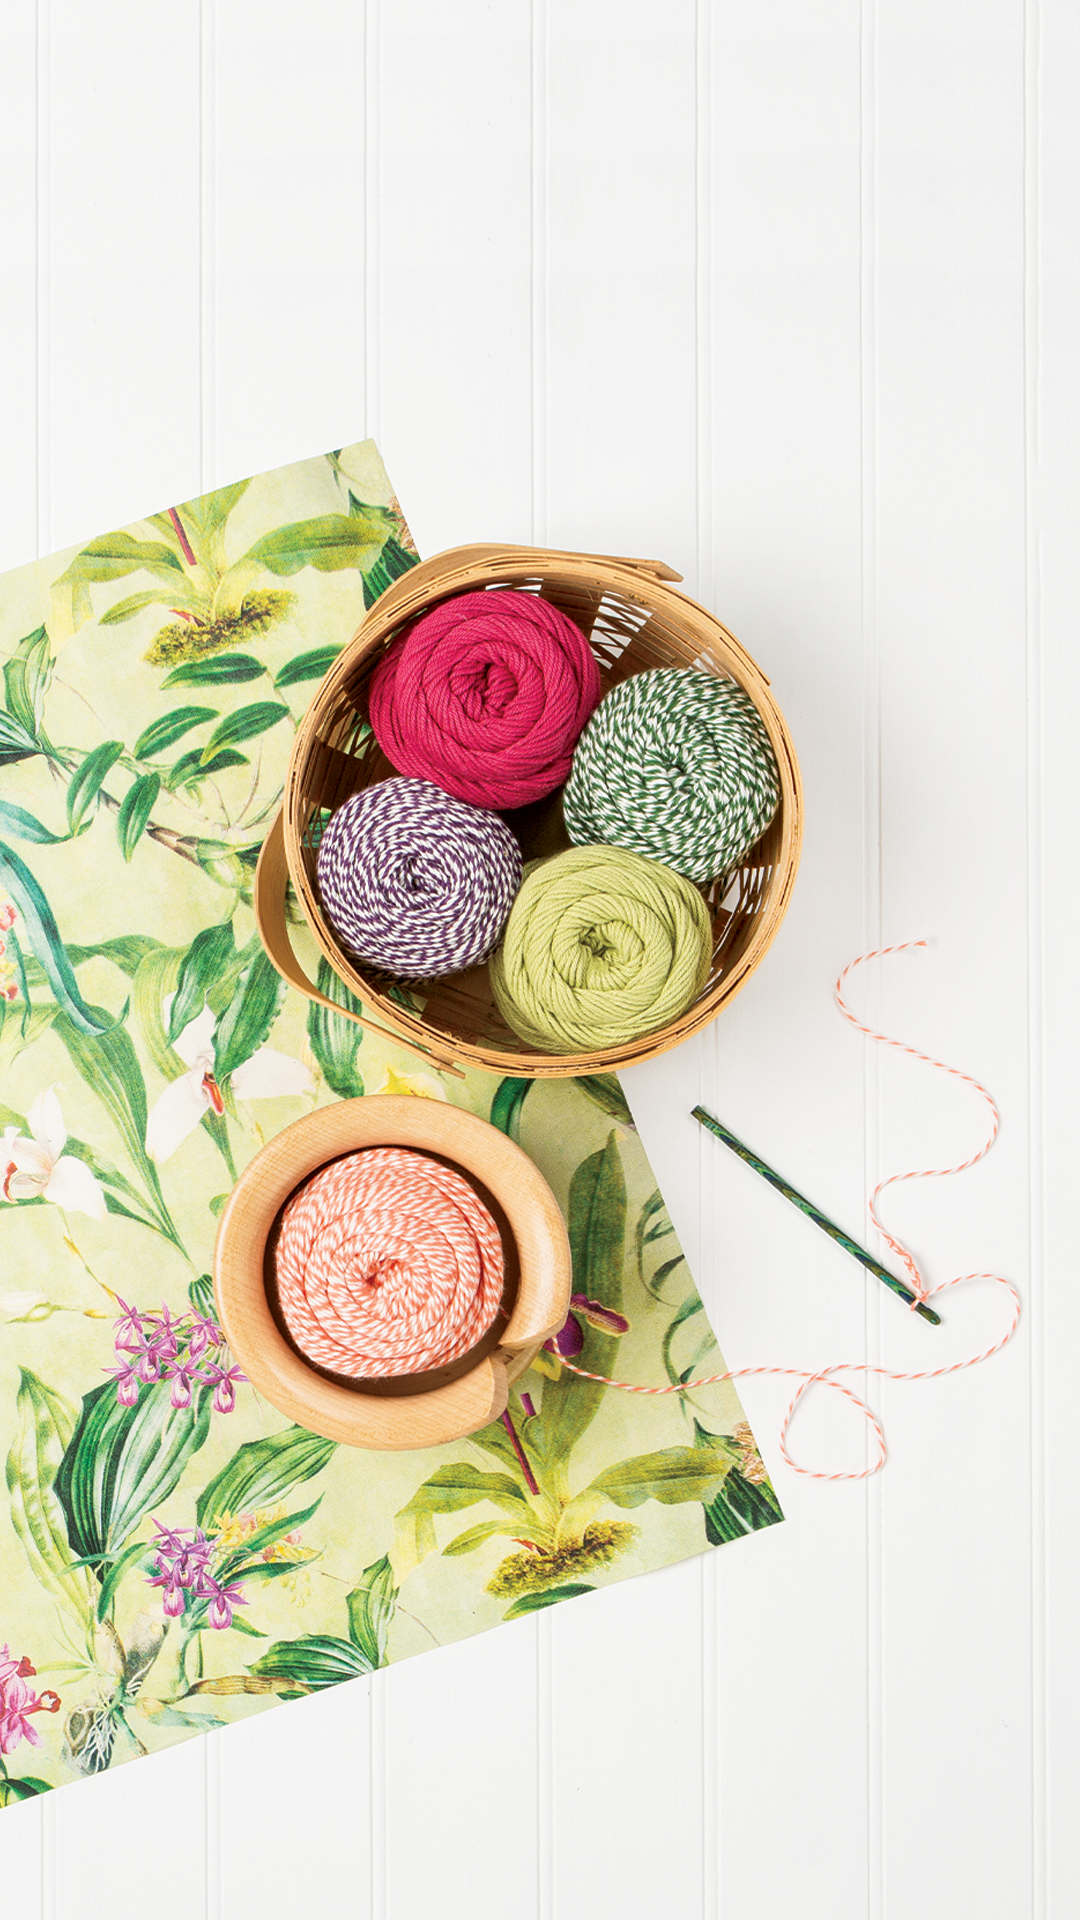 A top-down view of a white background with a floral pattern paper on it, with a yarn bowl filled with colorful cotton yarn.